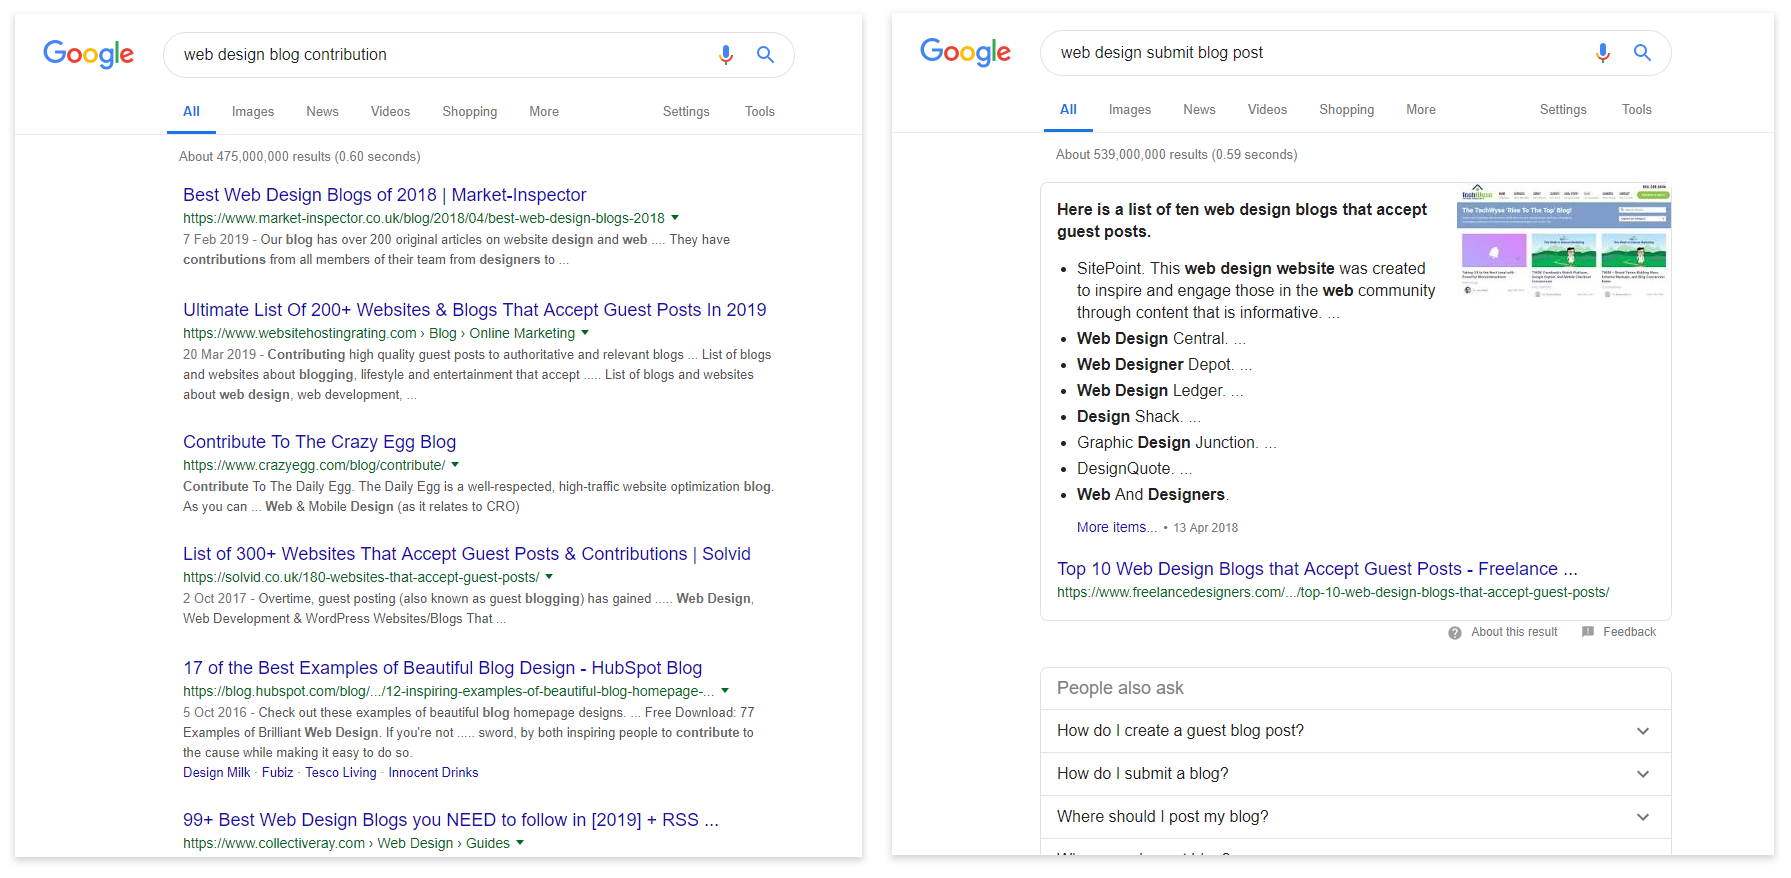 Searching Google for example guest blogs